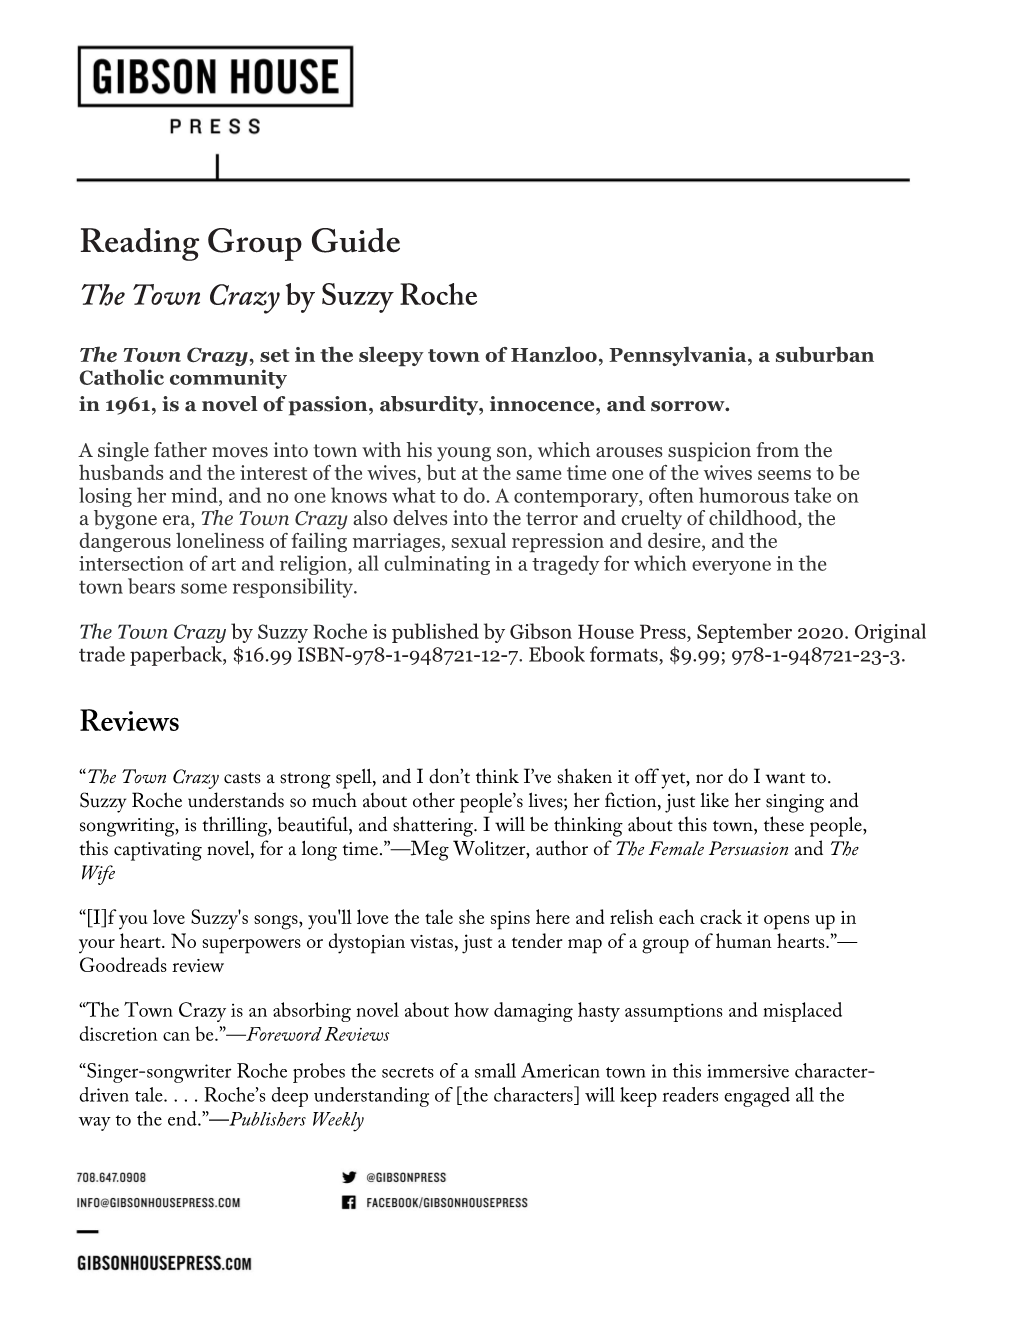 Reading Group Guide the Town Crazy by Suzzy Roche